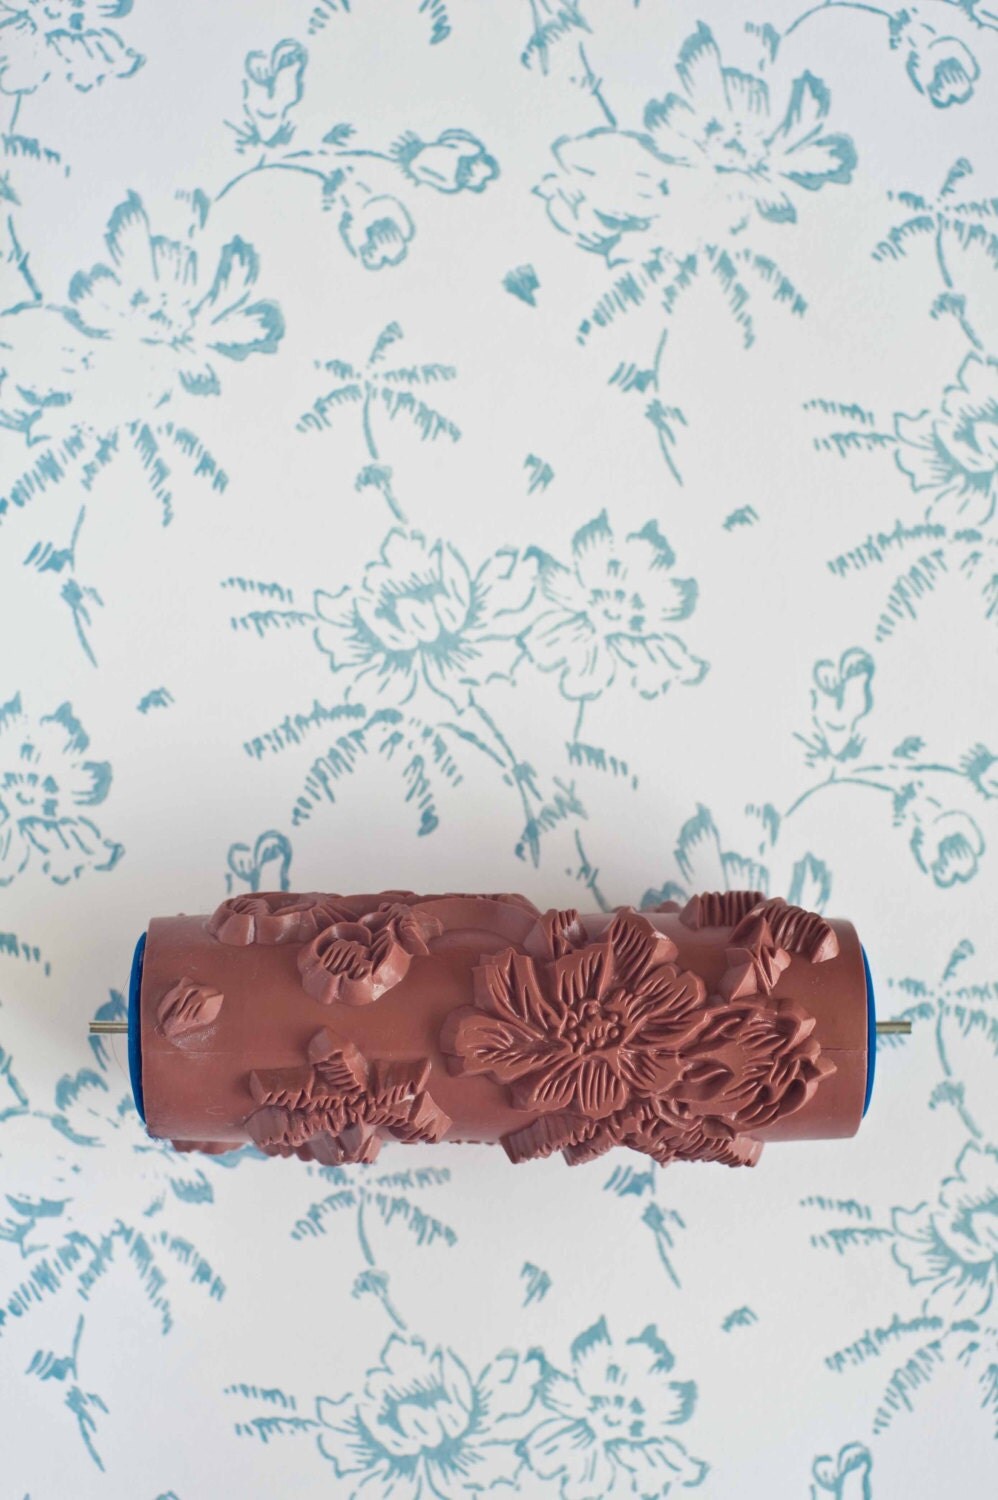 no. 16 Patterned Paint Roller from The by patternedpaintroller